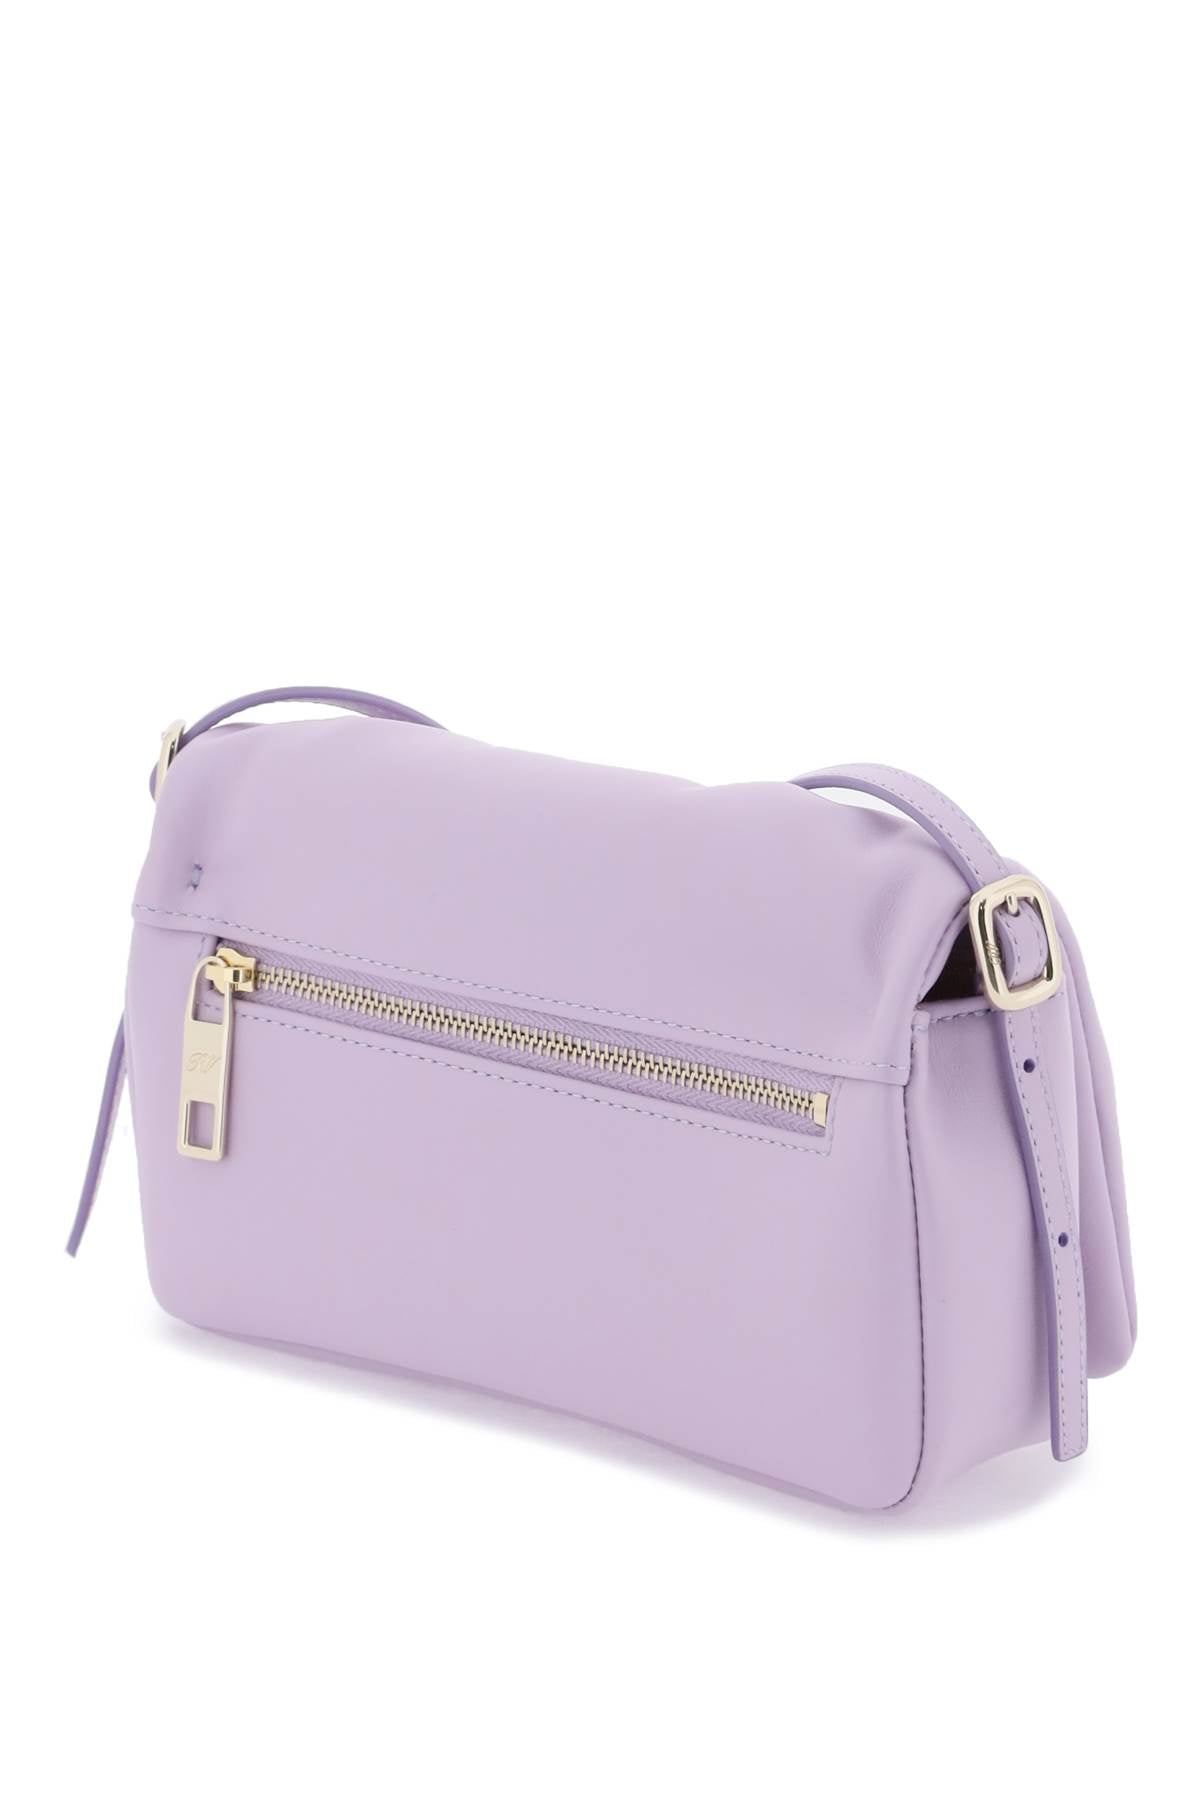 ROGER VIVIER Mini Leather Crossbody Bag with Iconic Buckle, Magnetic Closure & Adjustable Strap - Purple